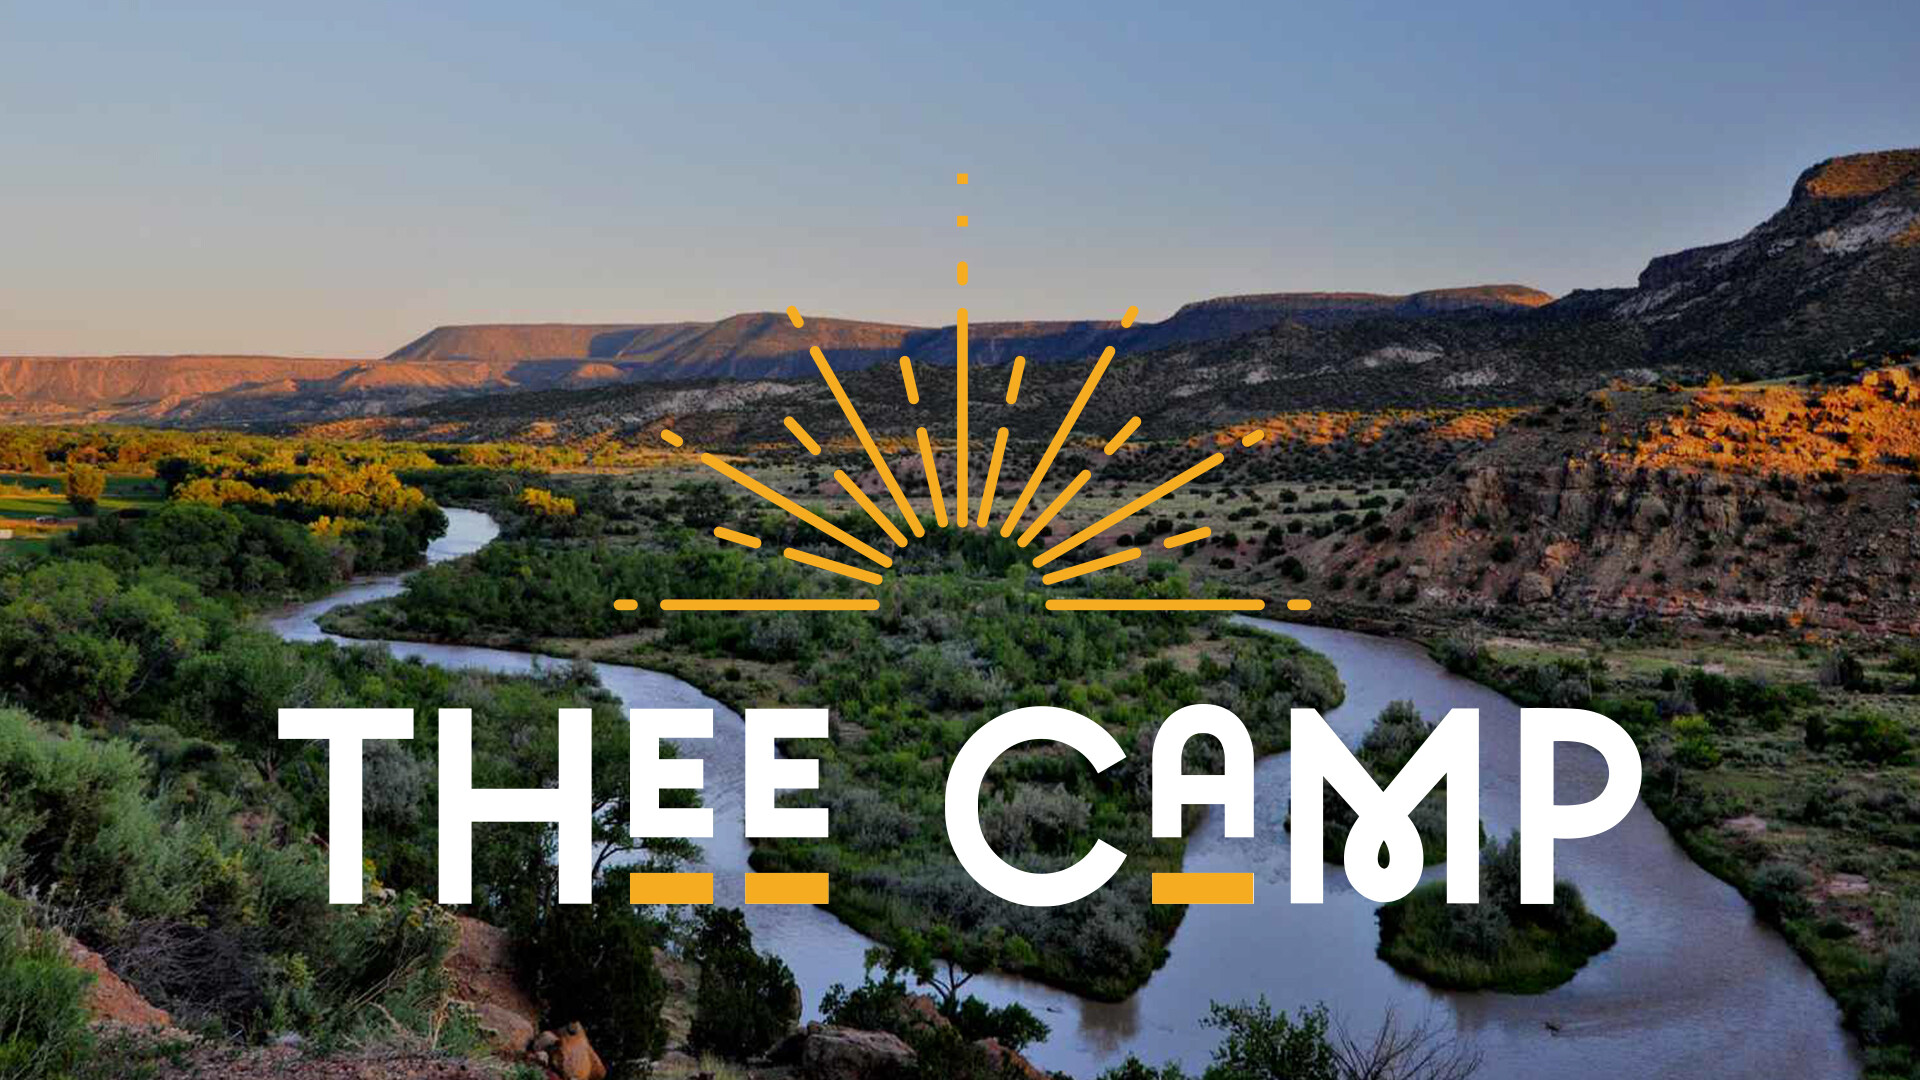 Thee Camp